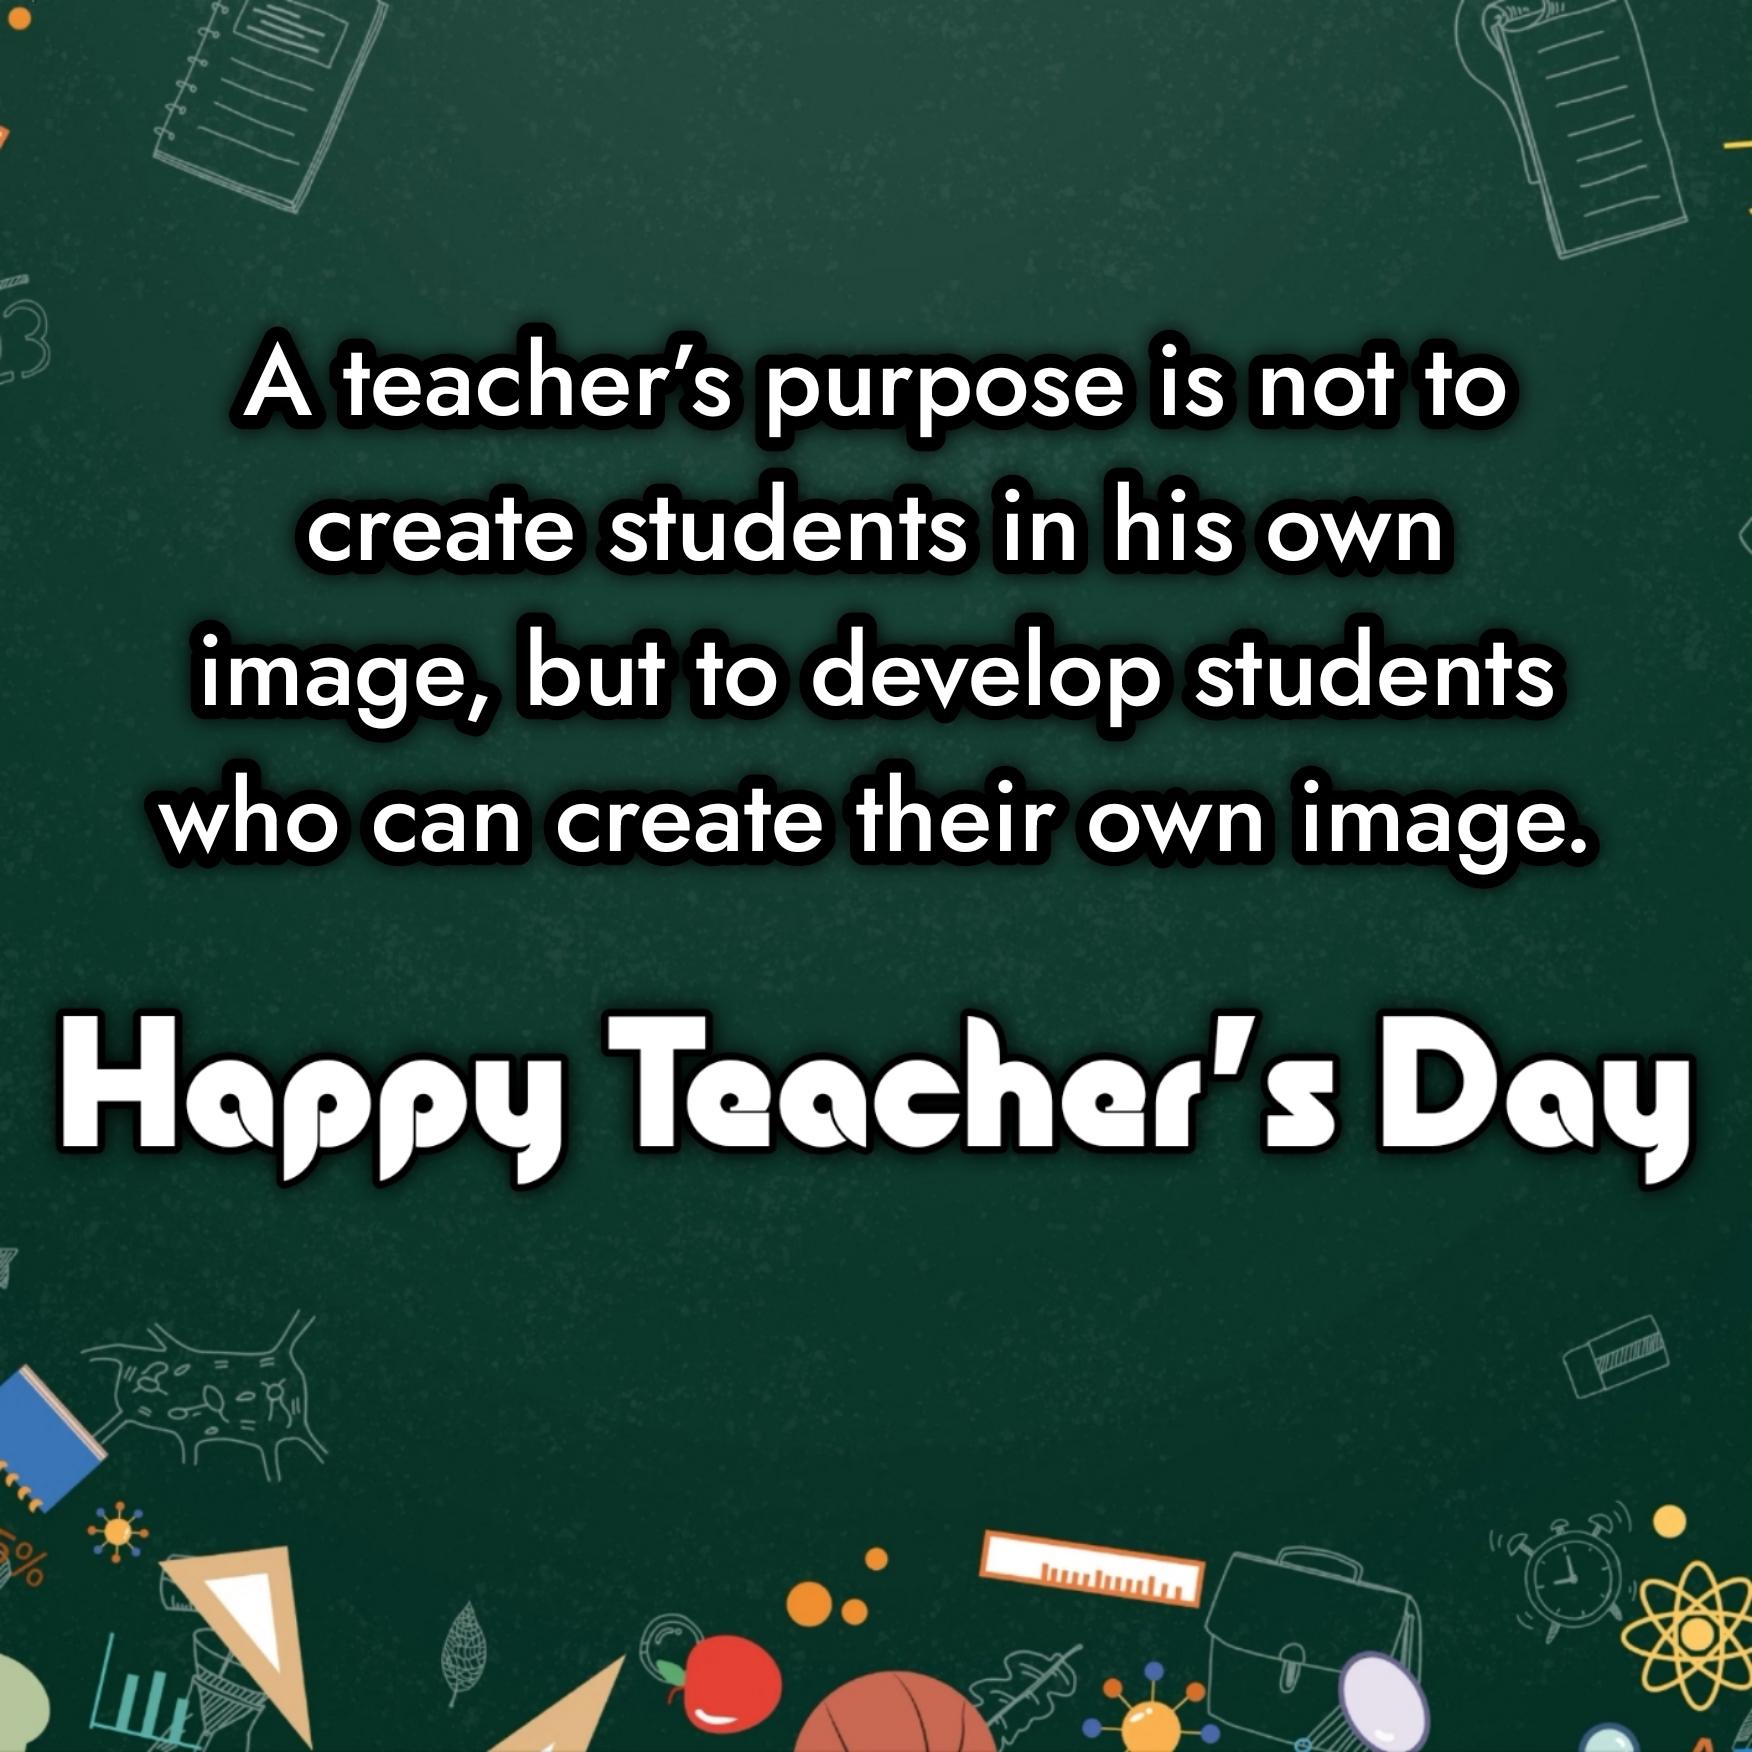 A teacher’s purpose is not to create students